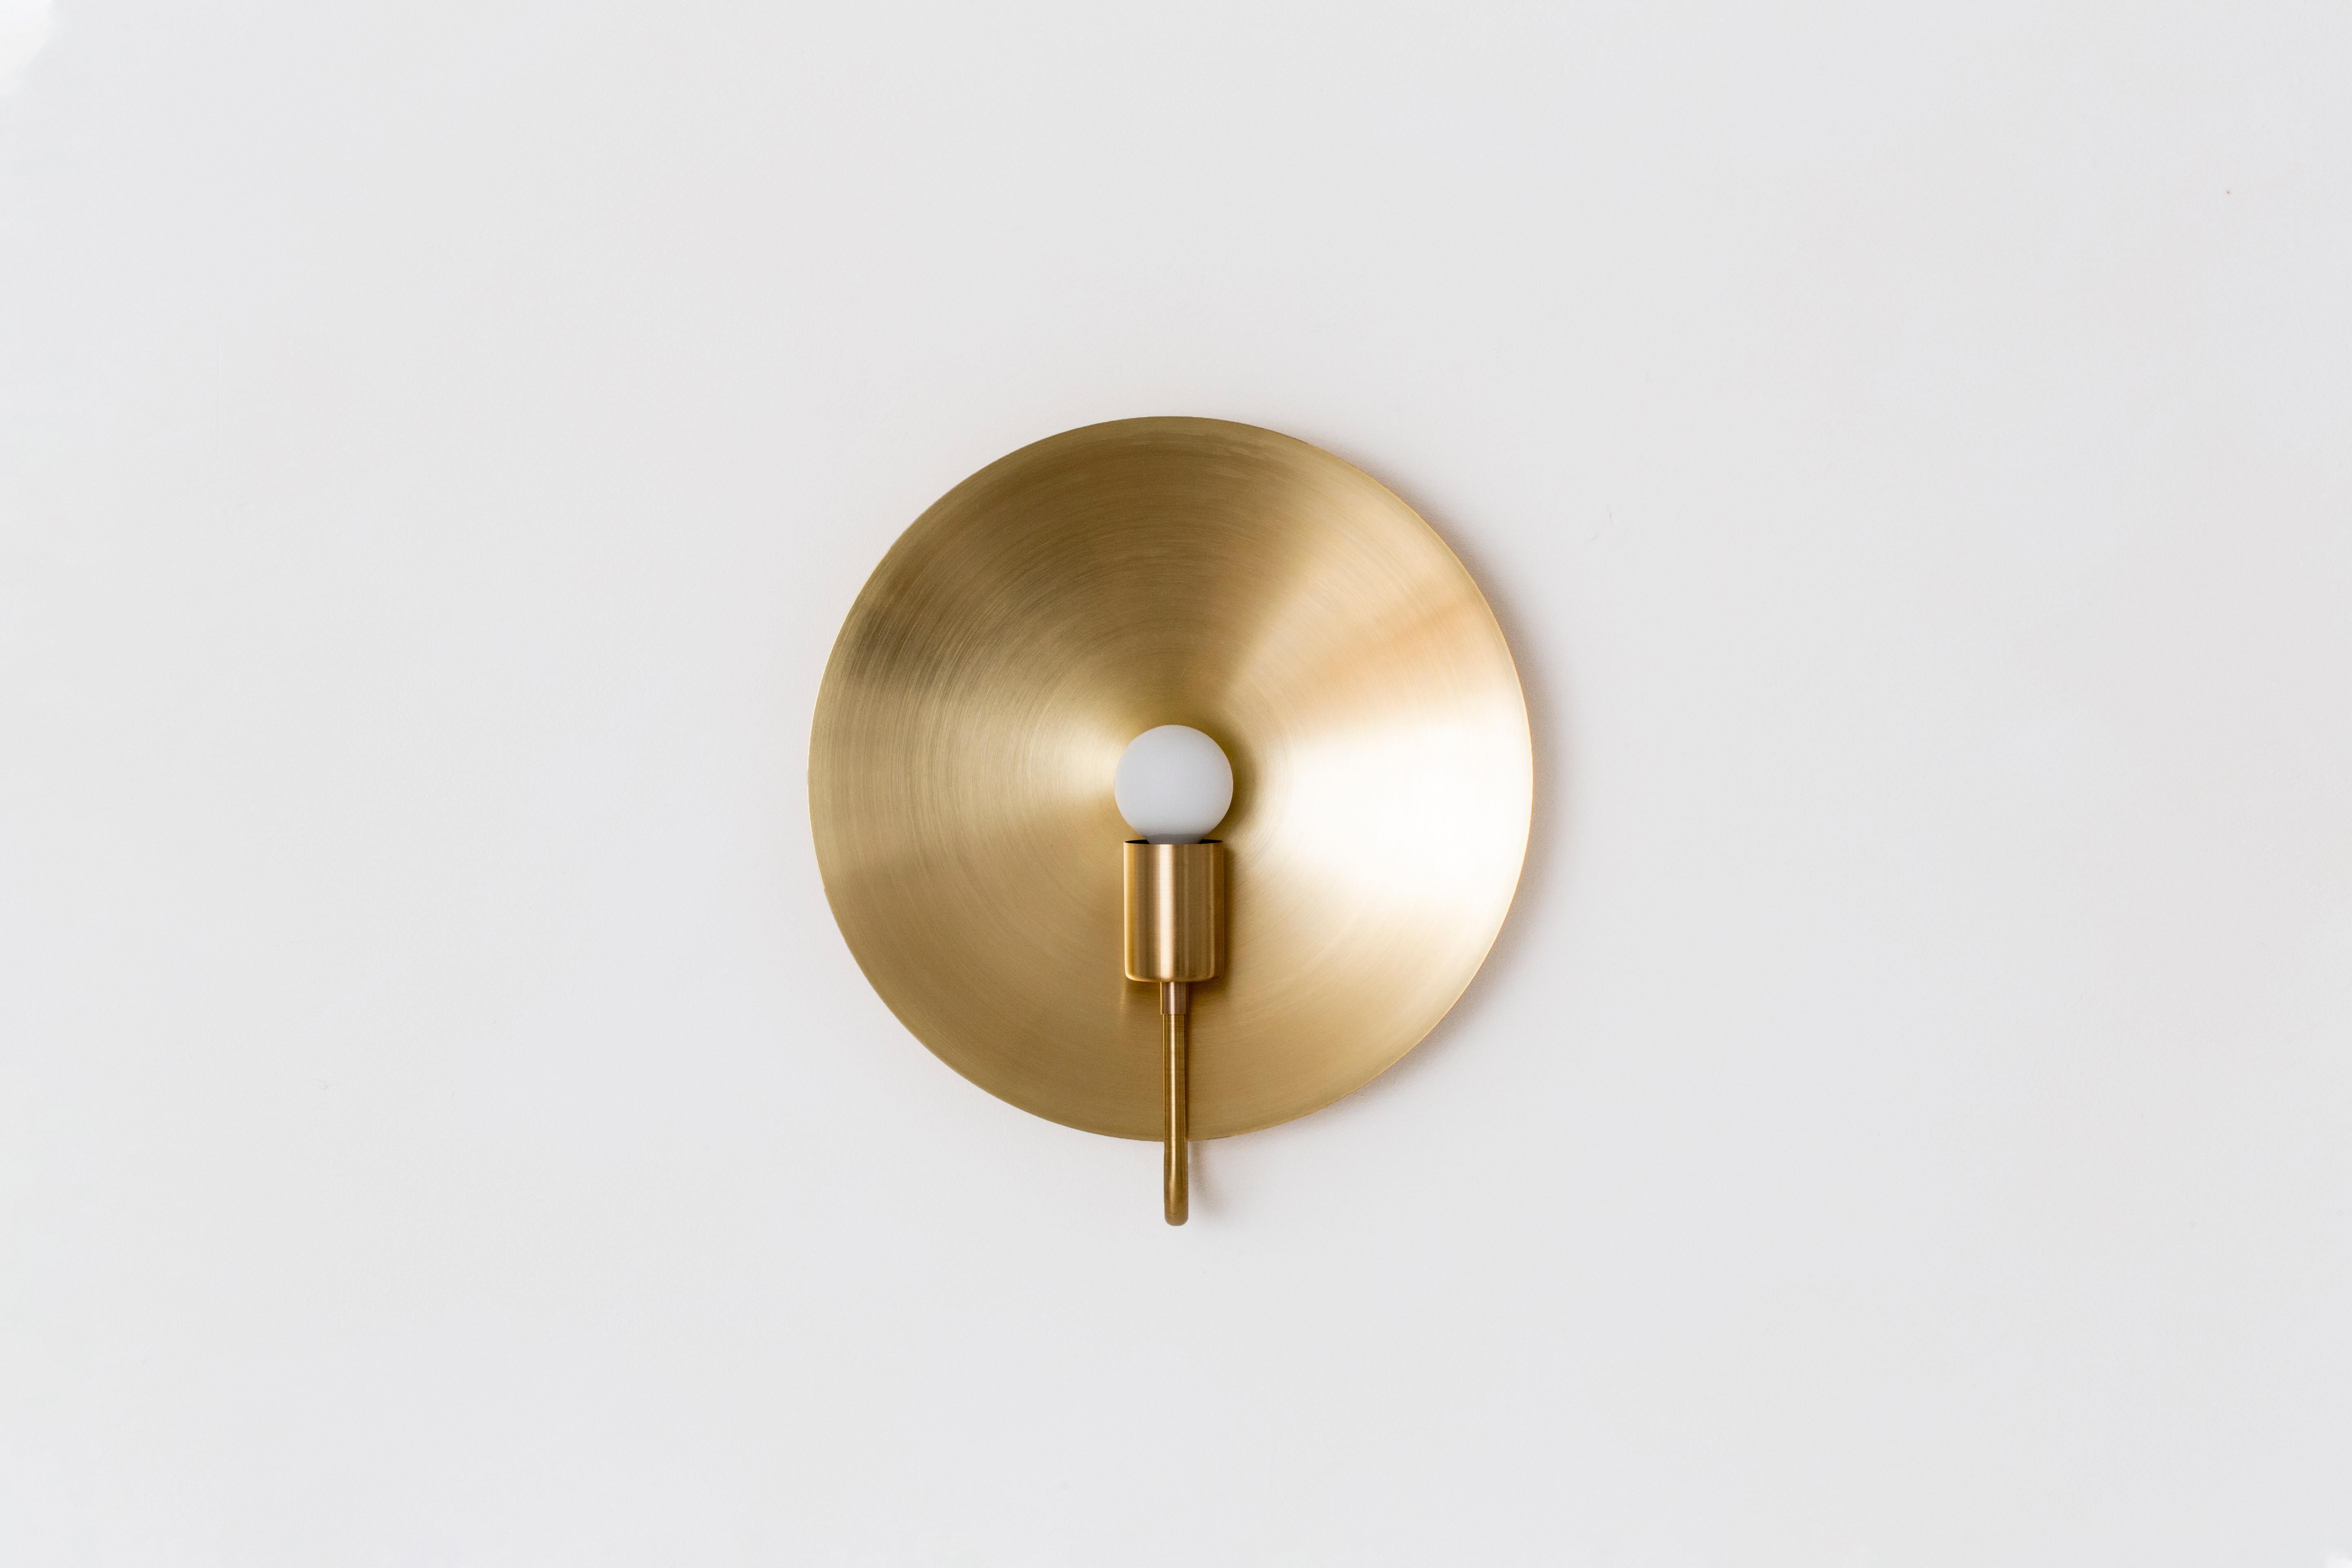 Spun Workstead Helios ADA Sconce in Brushed Nickel For Sale